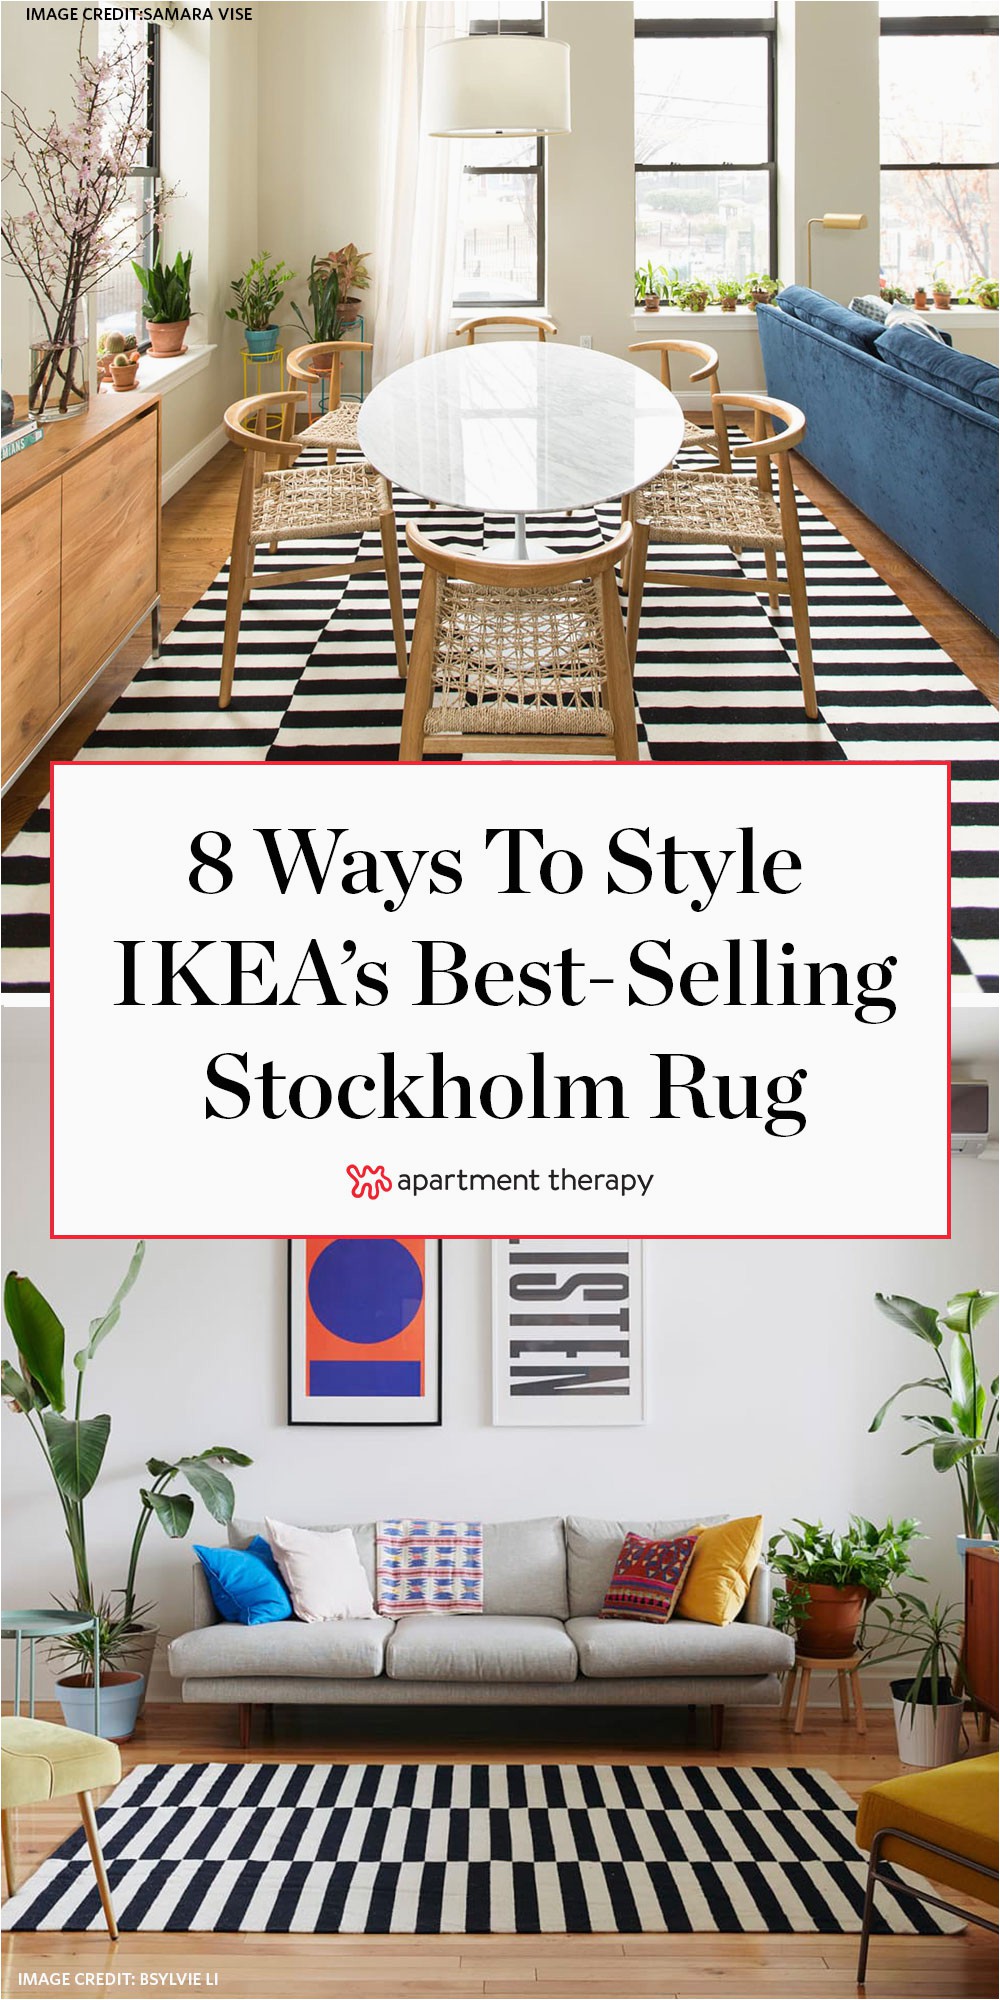 Ikea area Rugs for Bedroom How to Design A Room with E Of Ikea S Best Selling Rug